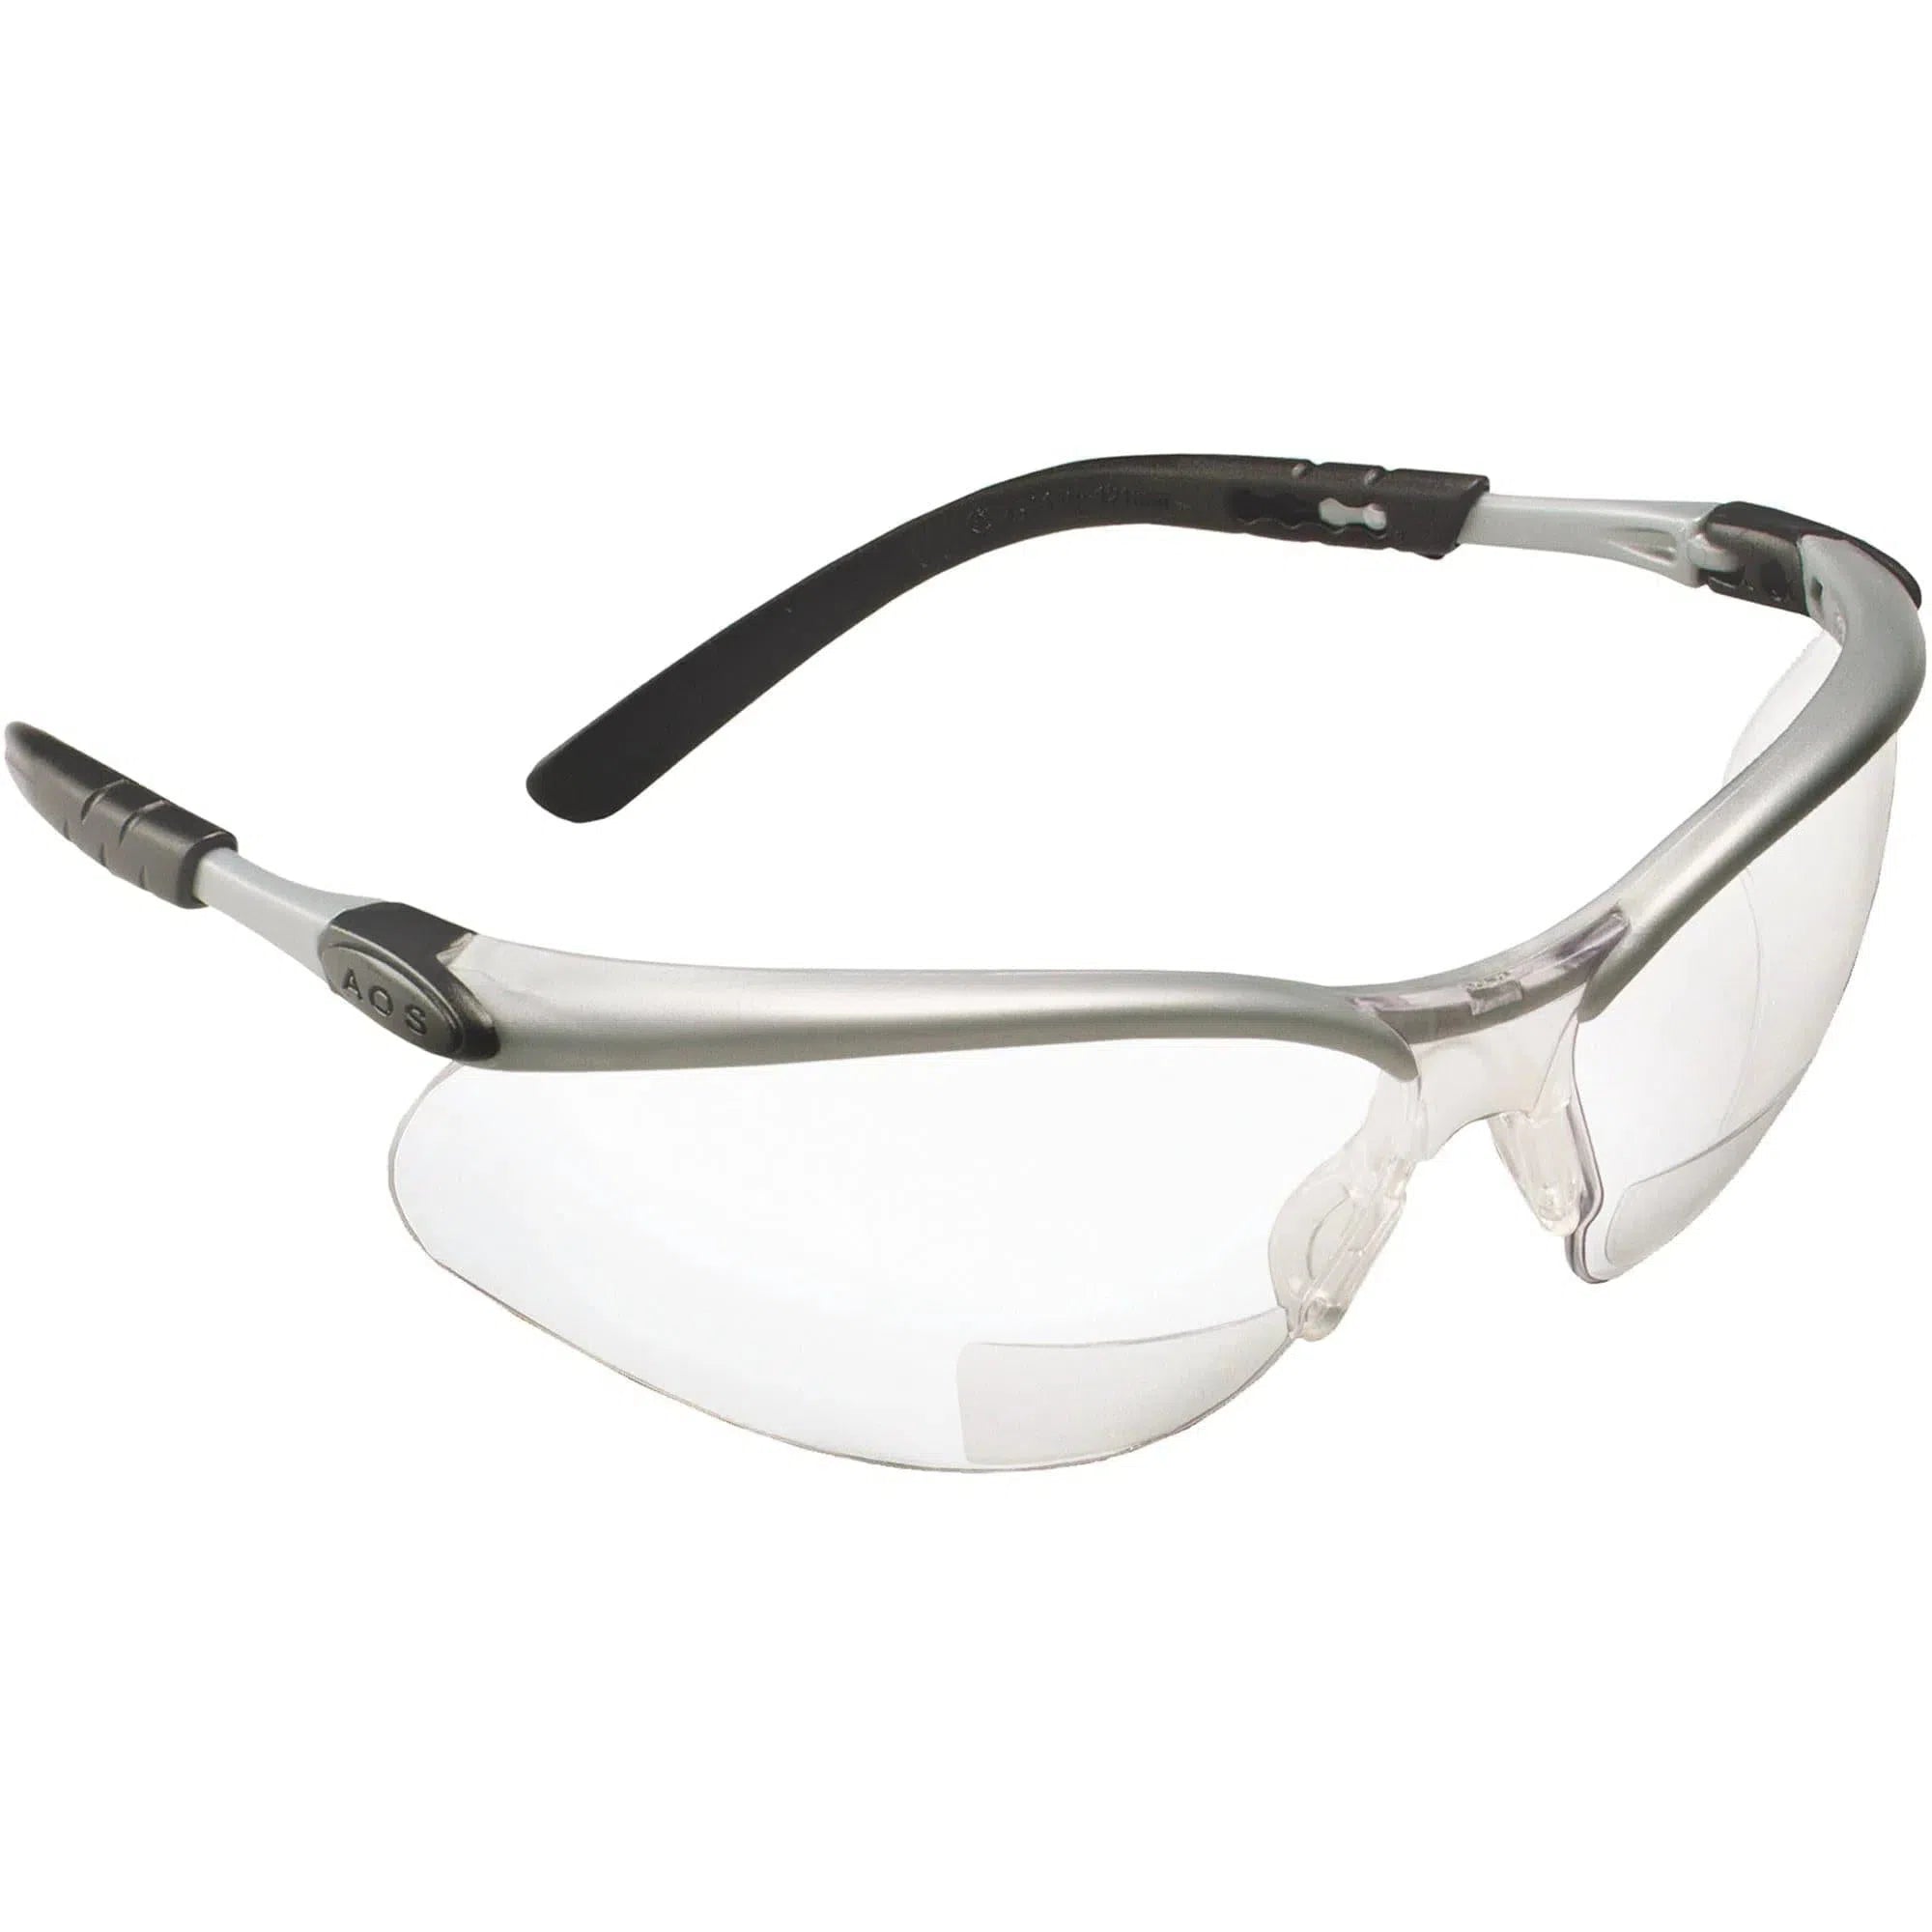 3M safety glasses with reading lenses